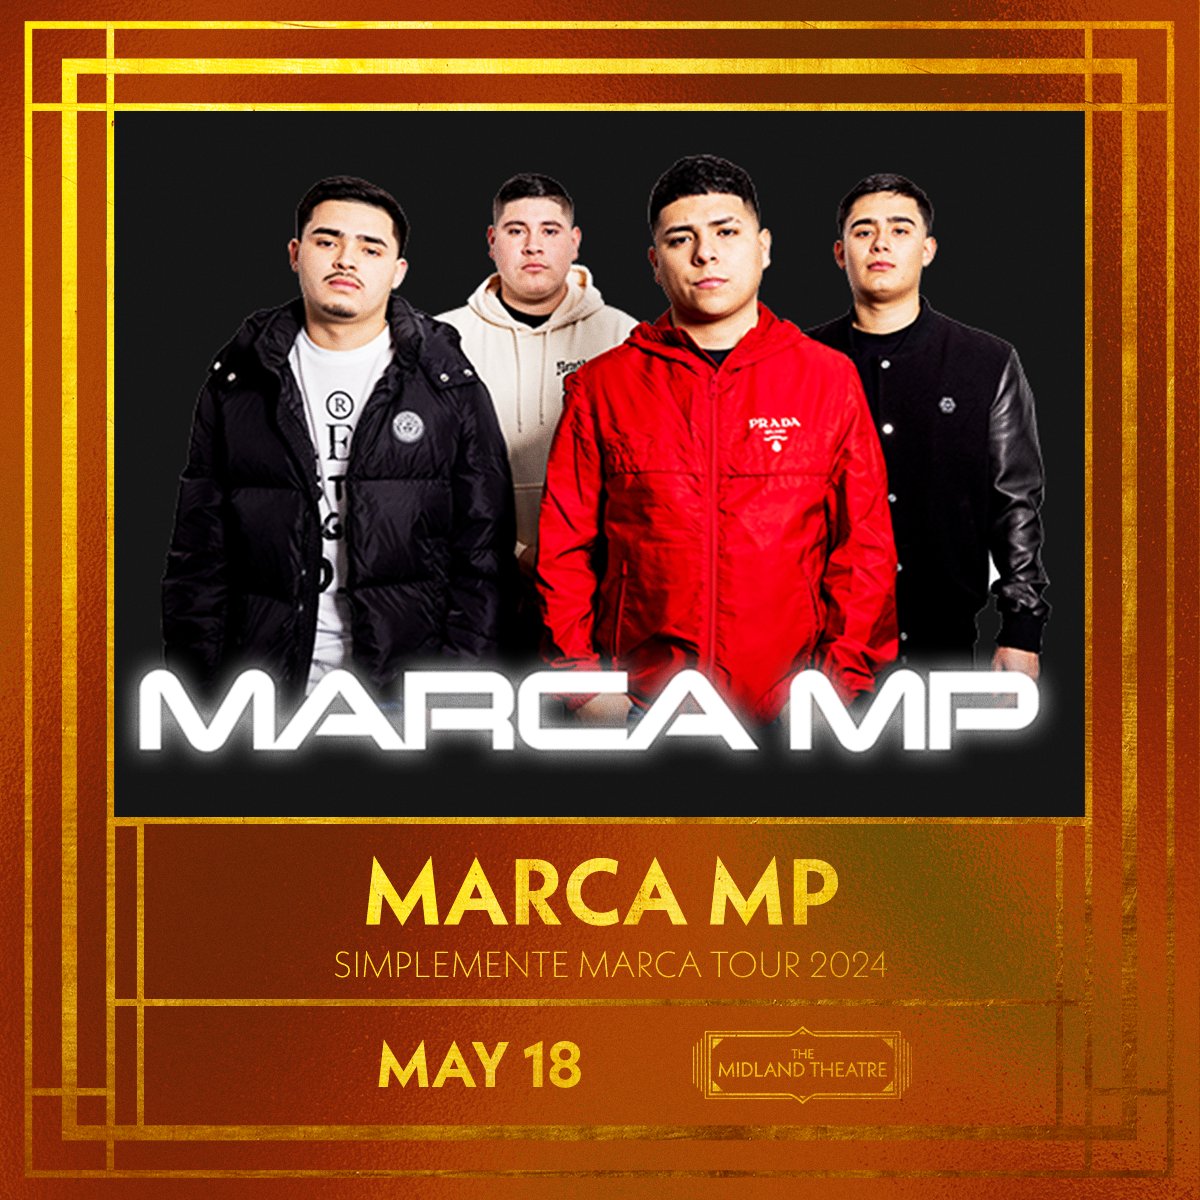 JUST ANNOUNCED Marca MP returns to The Midland Theatre May 18 for their Simplemente Marca Tour 2024! Tickets on sale Friday, February 9 at 10 a.m.